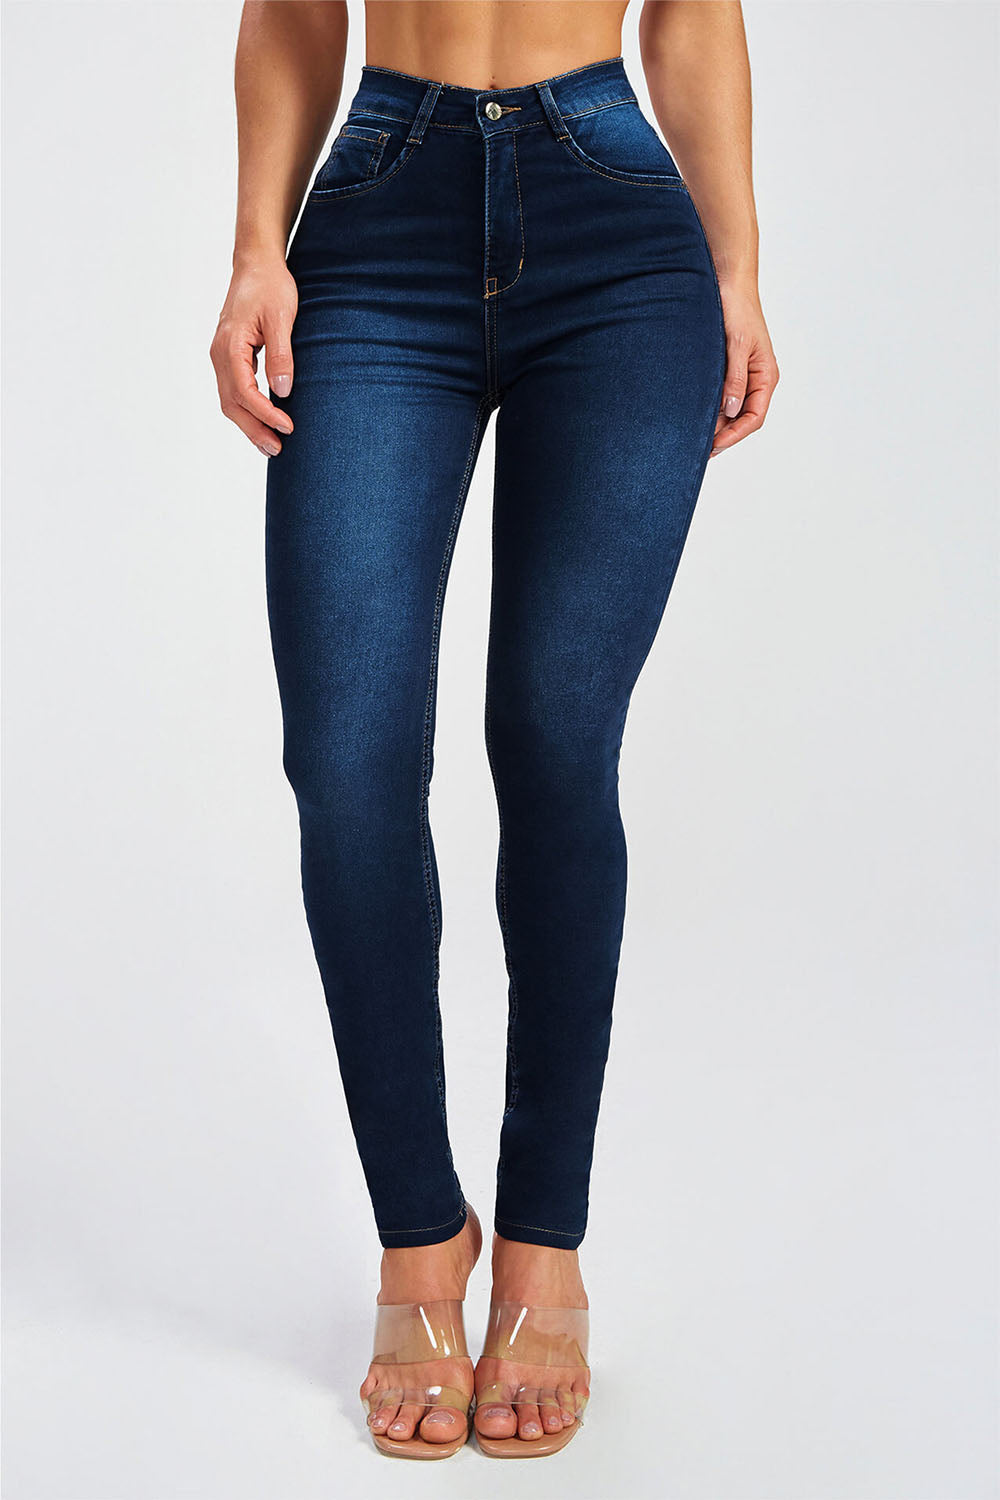 Buttoned Skinny Jeans - Bottoms - Pants - 9 - 2024